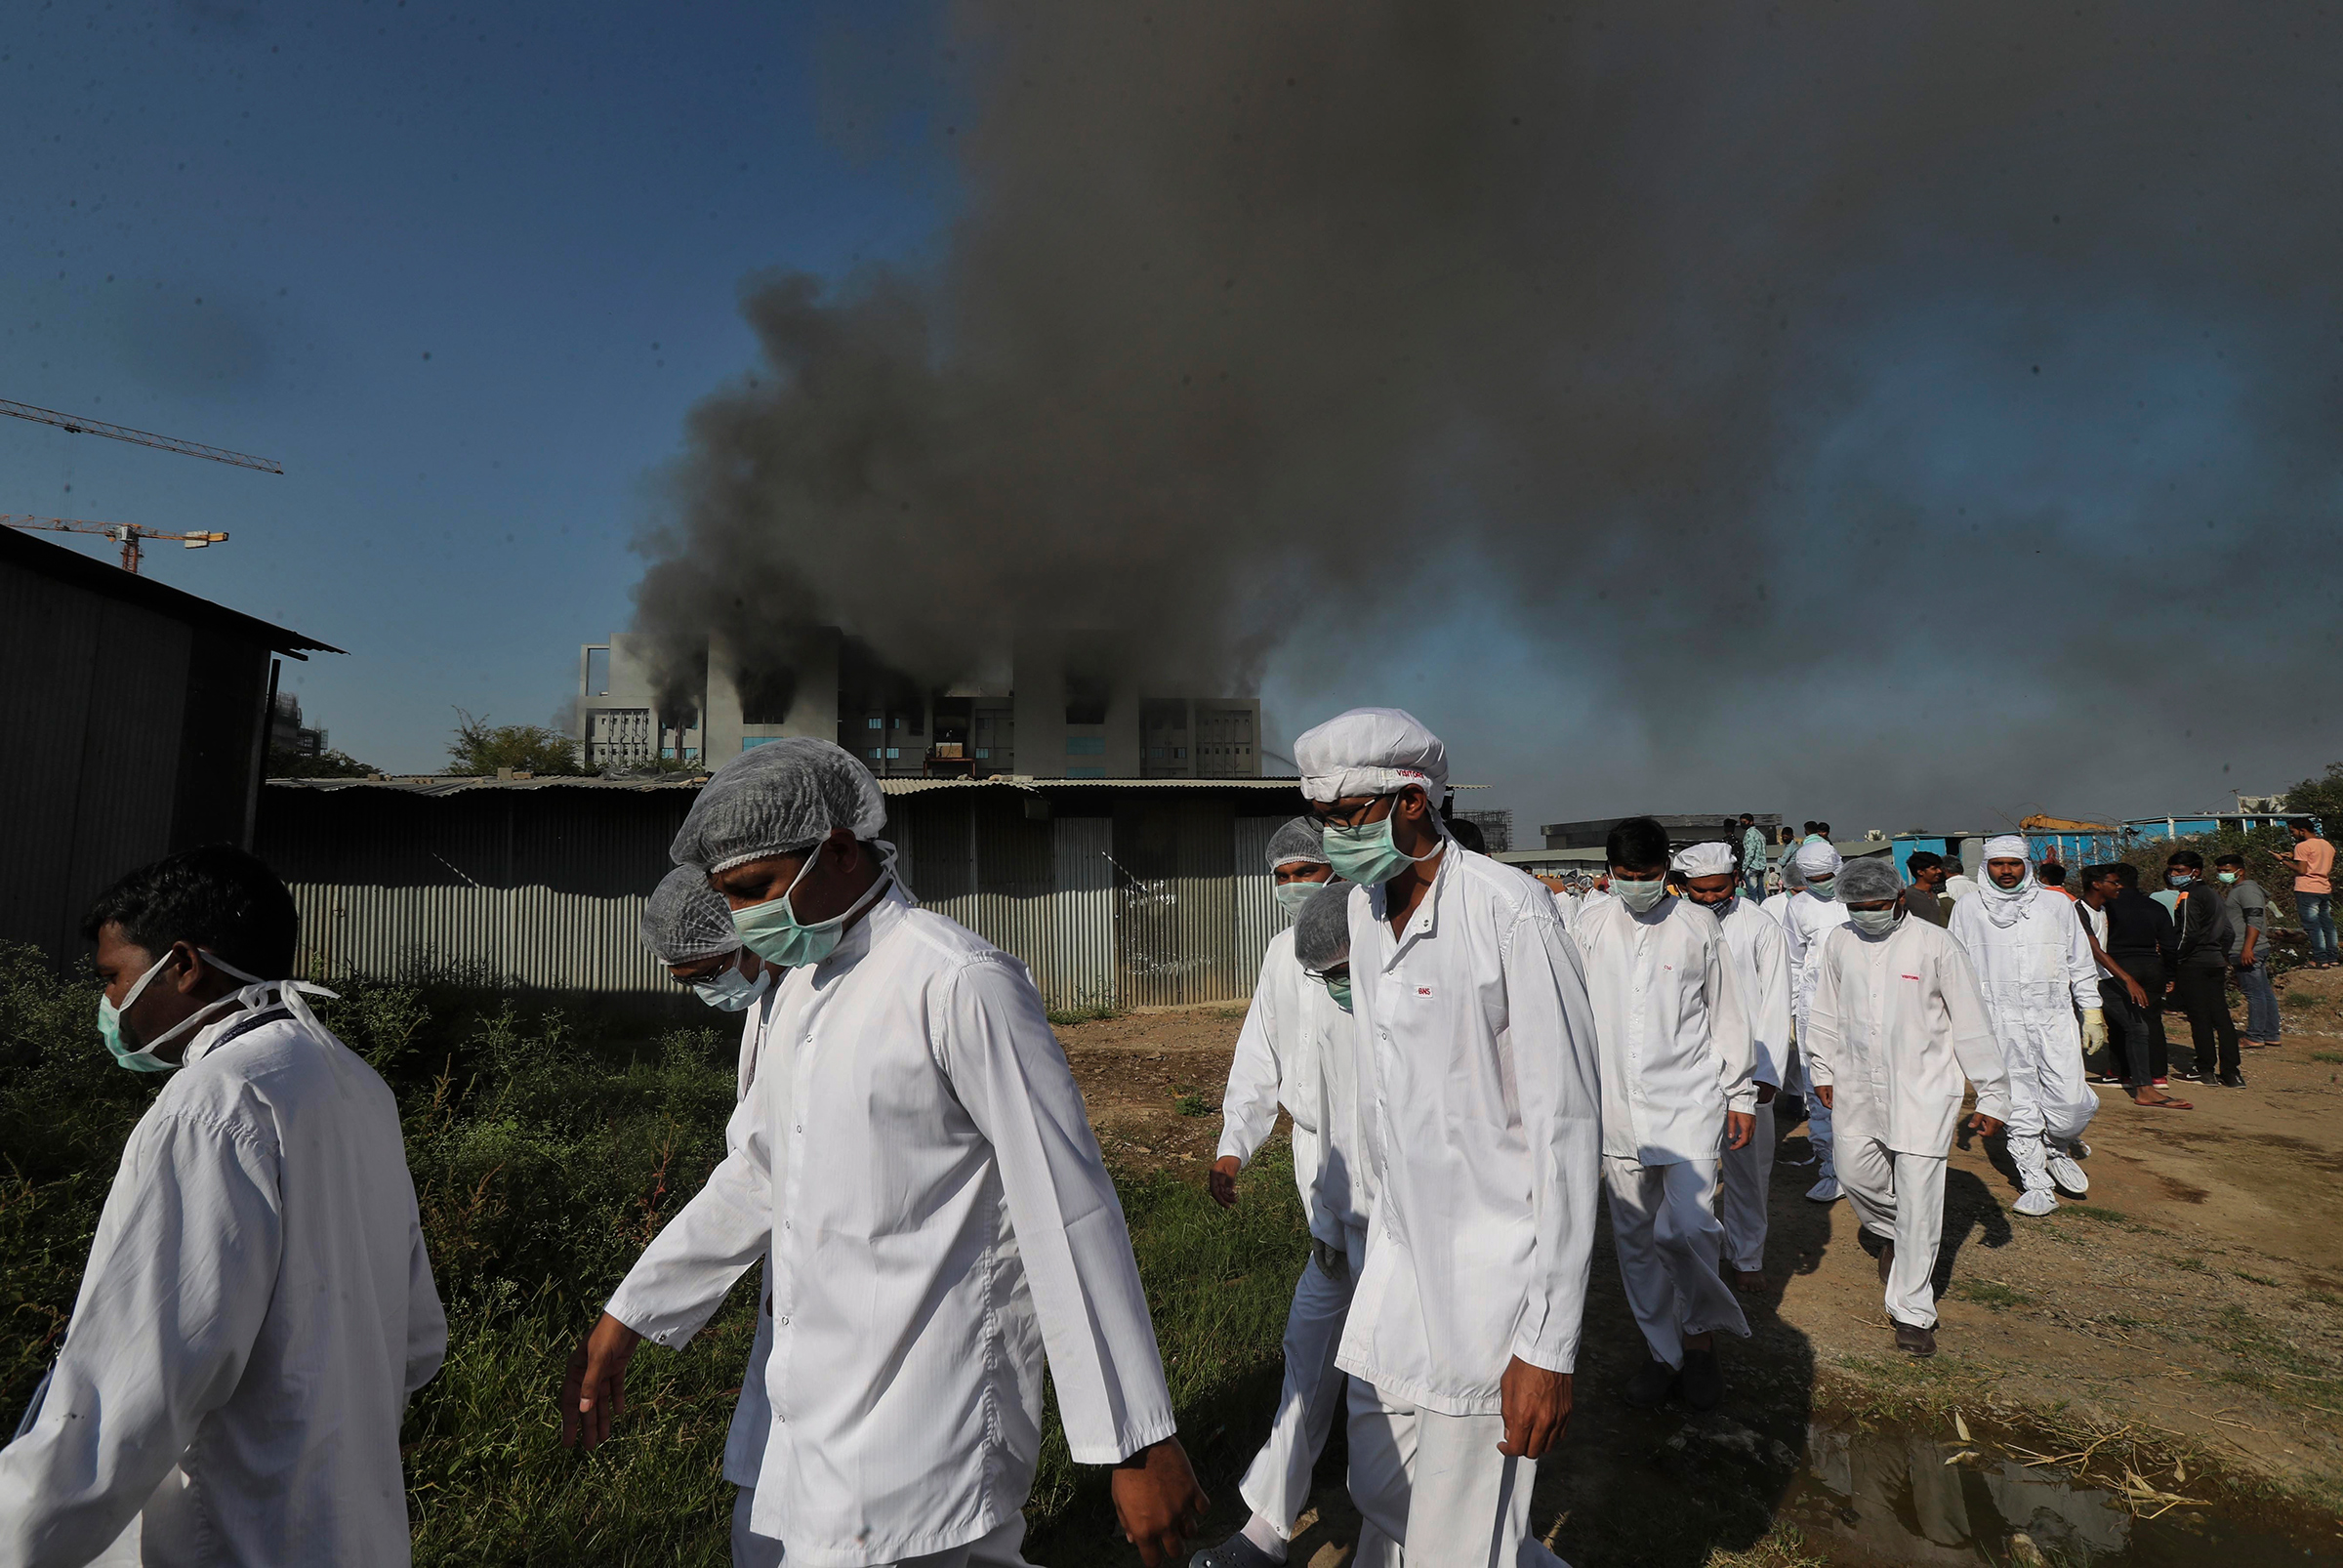 Employees leave as smoke rises from a fire at Serum Institute of India, Pune, on Jan. 21, 2021